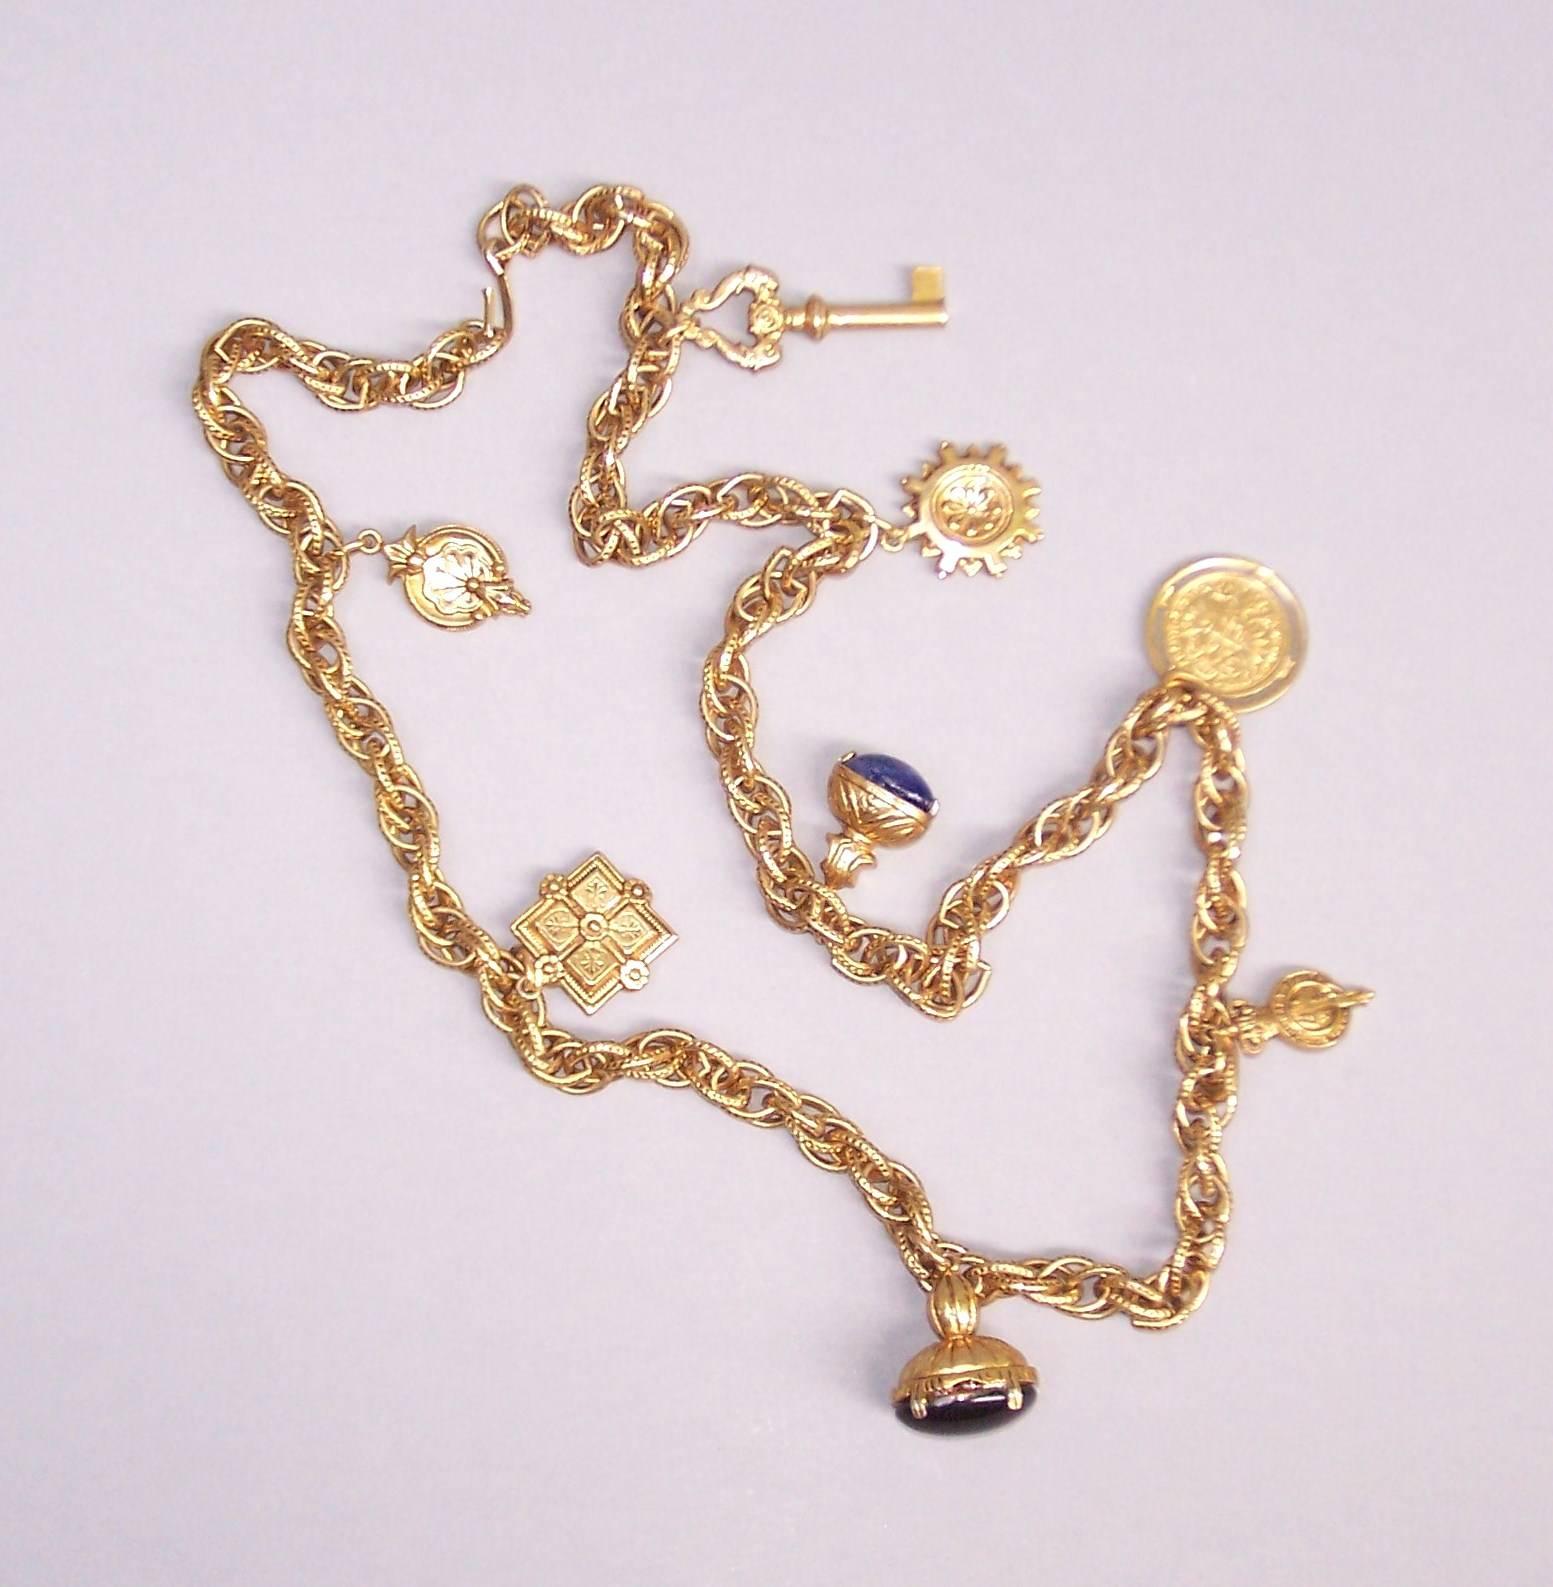 This 1980's gold tone rope necklace is decorated with old world Victorian style charms to create a stylish accessory for any ensemble.  It measures 36" long with eight charms and securely closes with a simple hook.  Wear it long or double it up